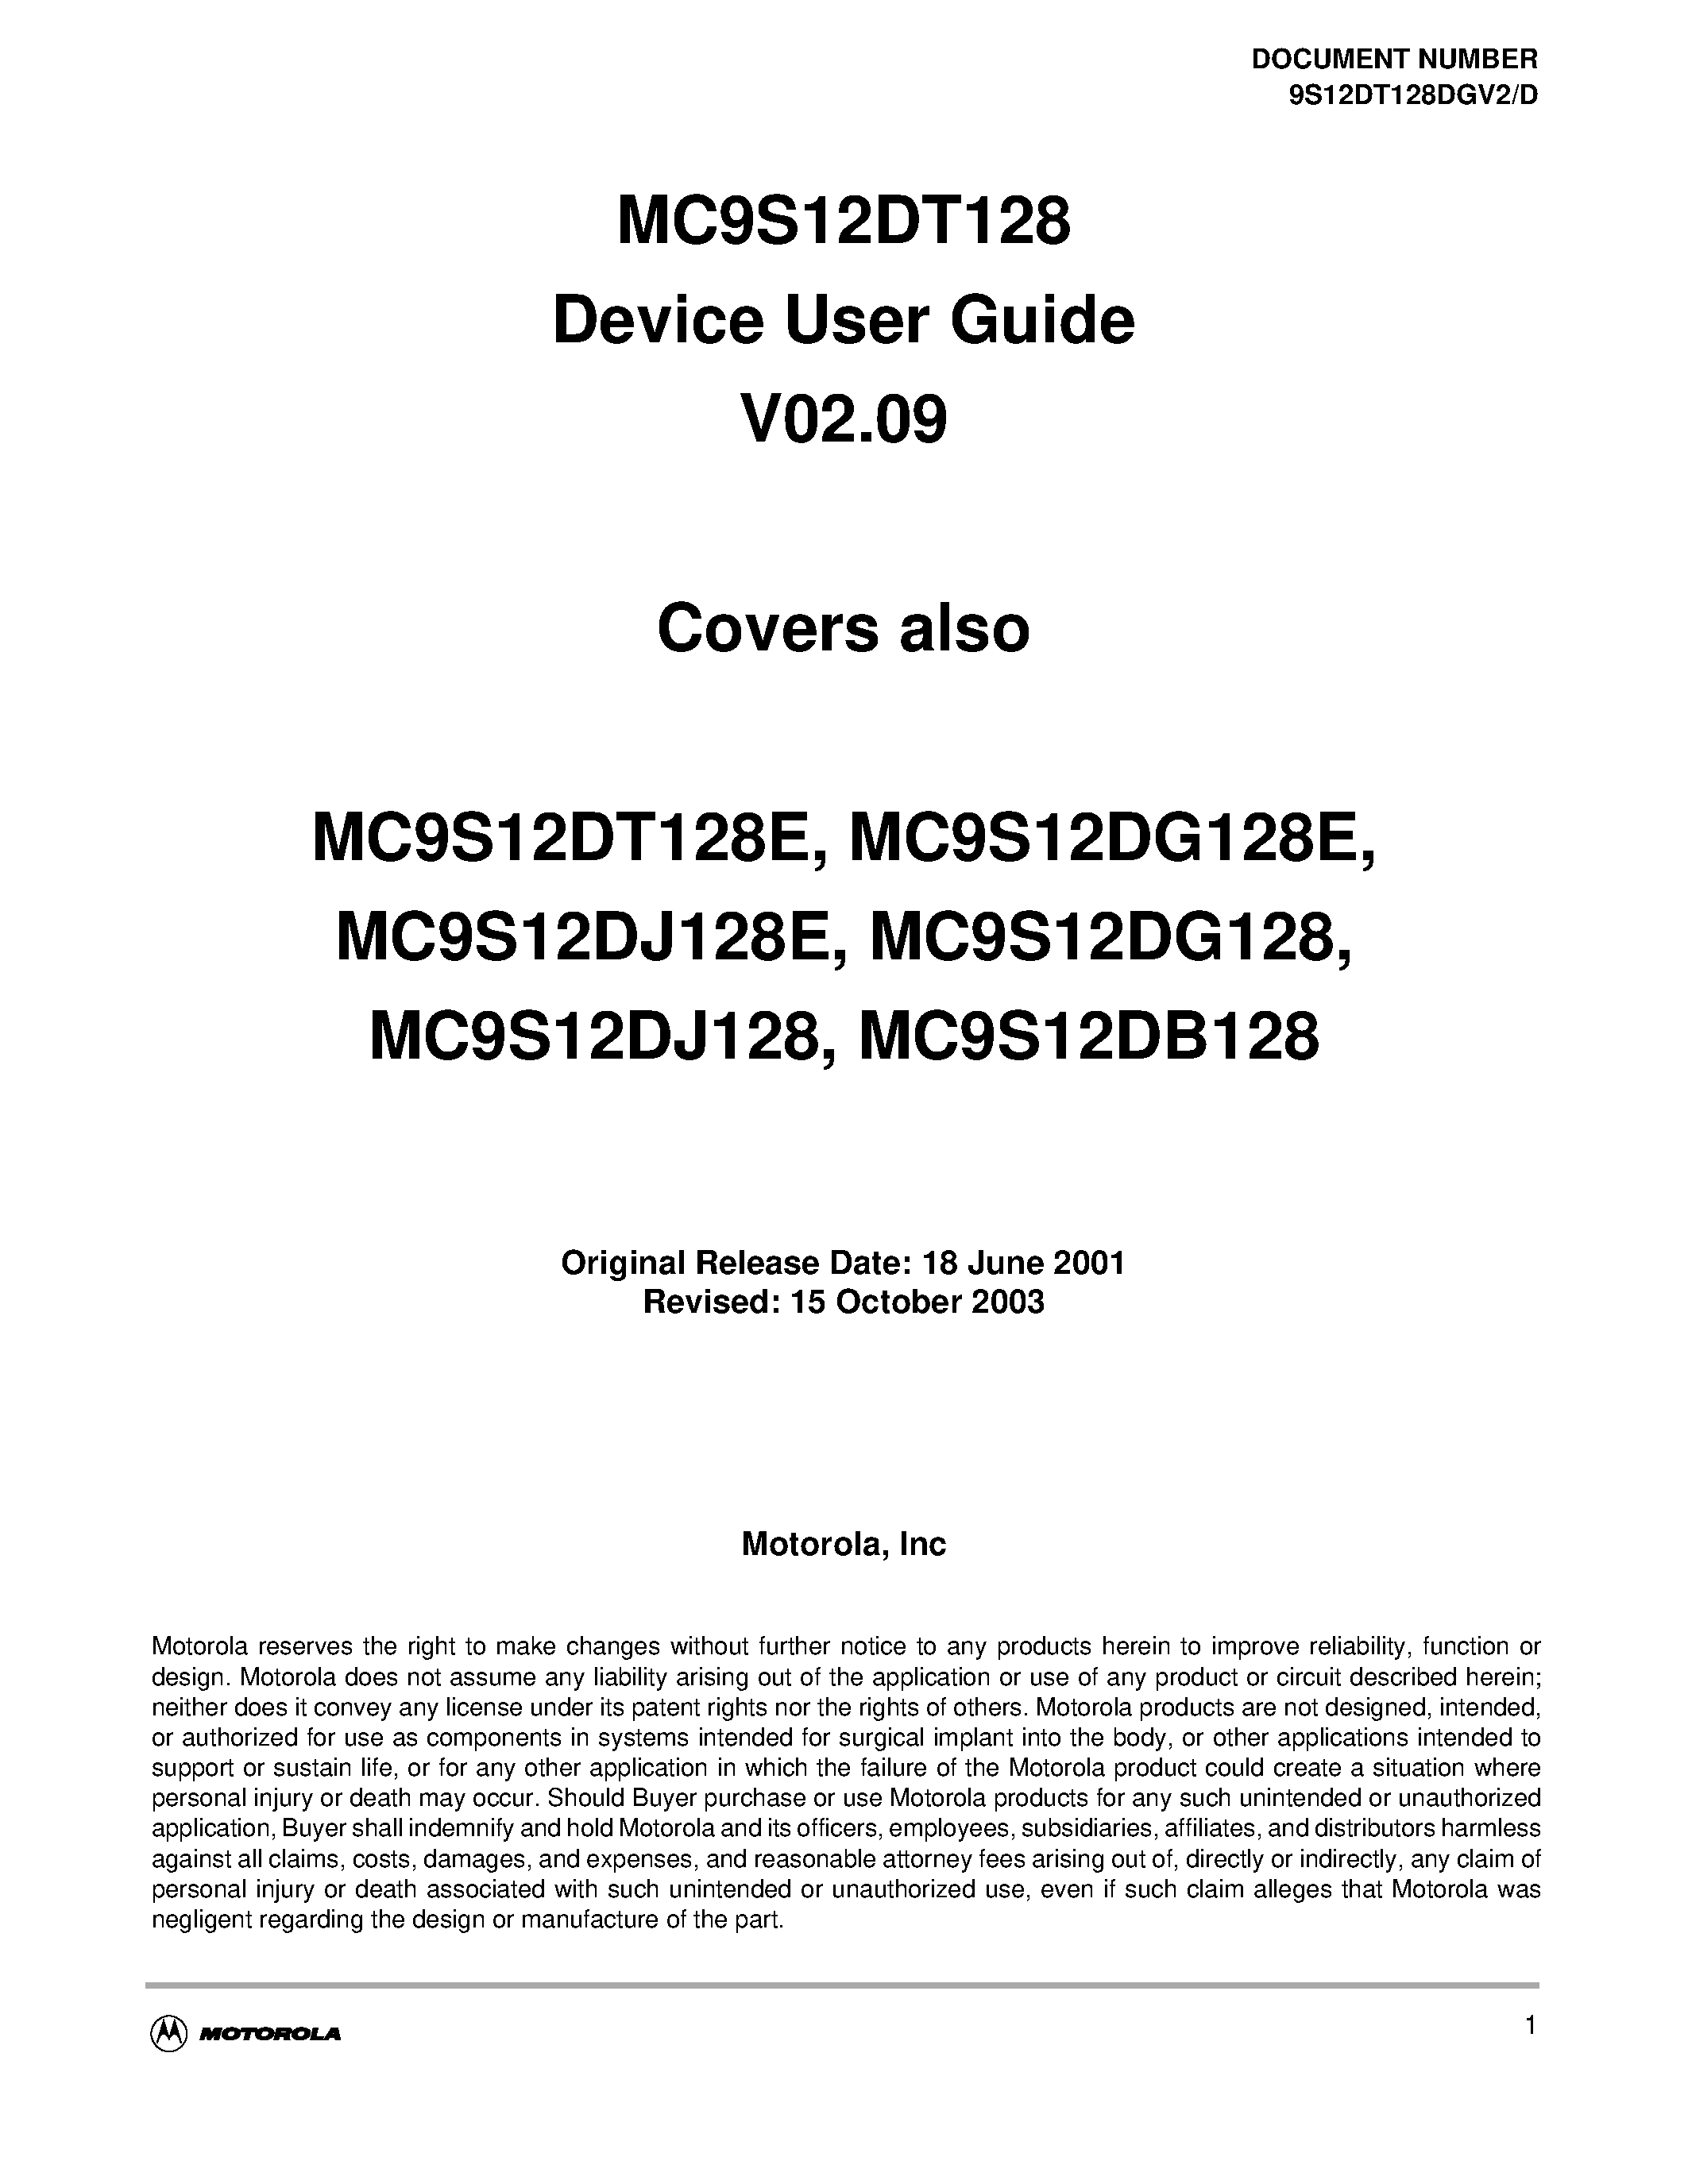 Datasheet S12SCIV2 - MC9S12DT128 Device User Guide V02.09 page 1